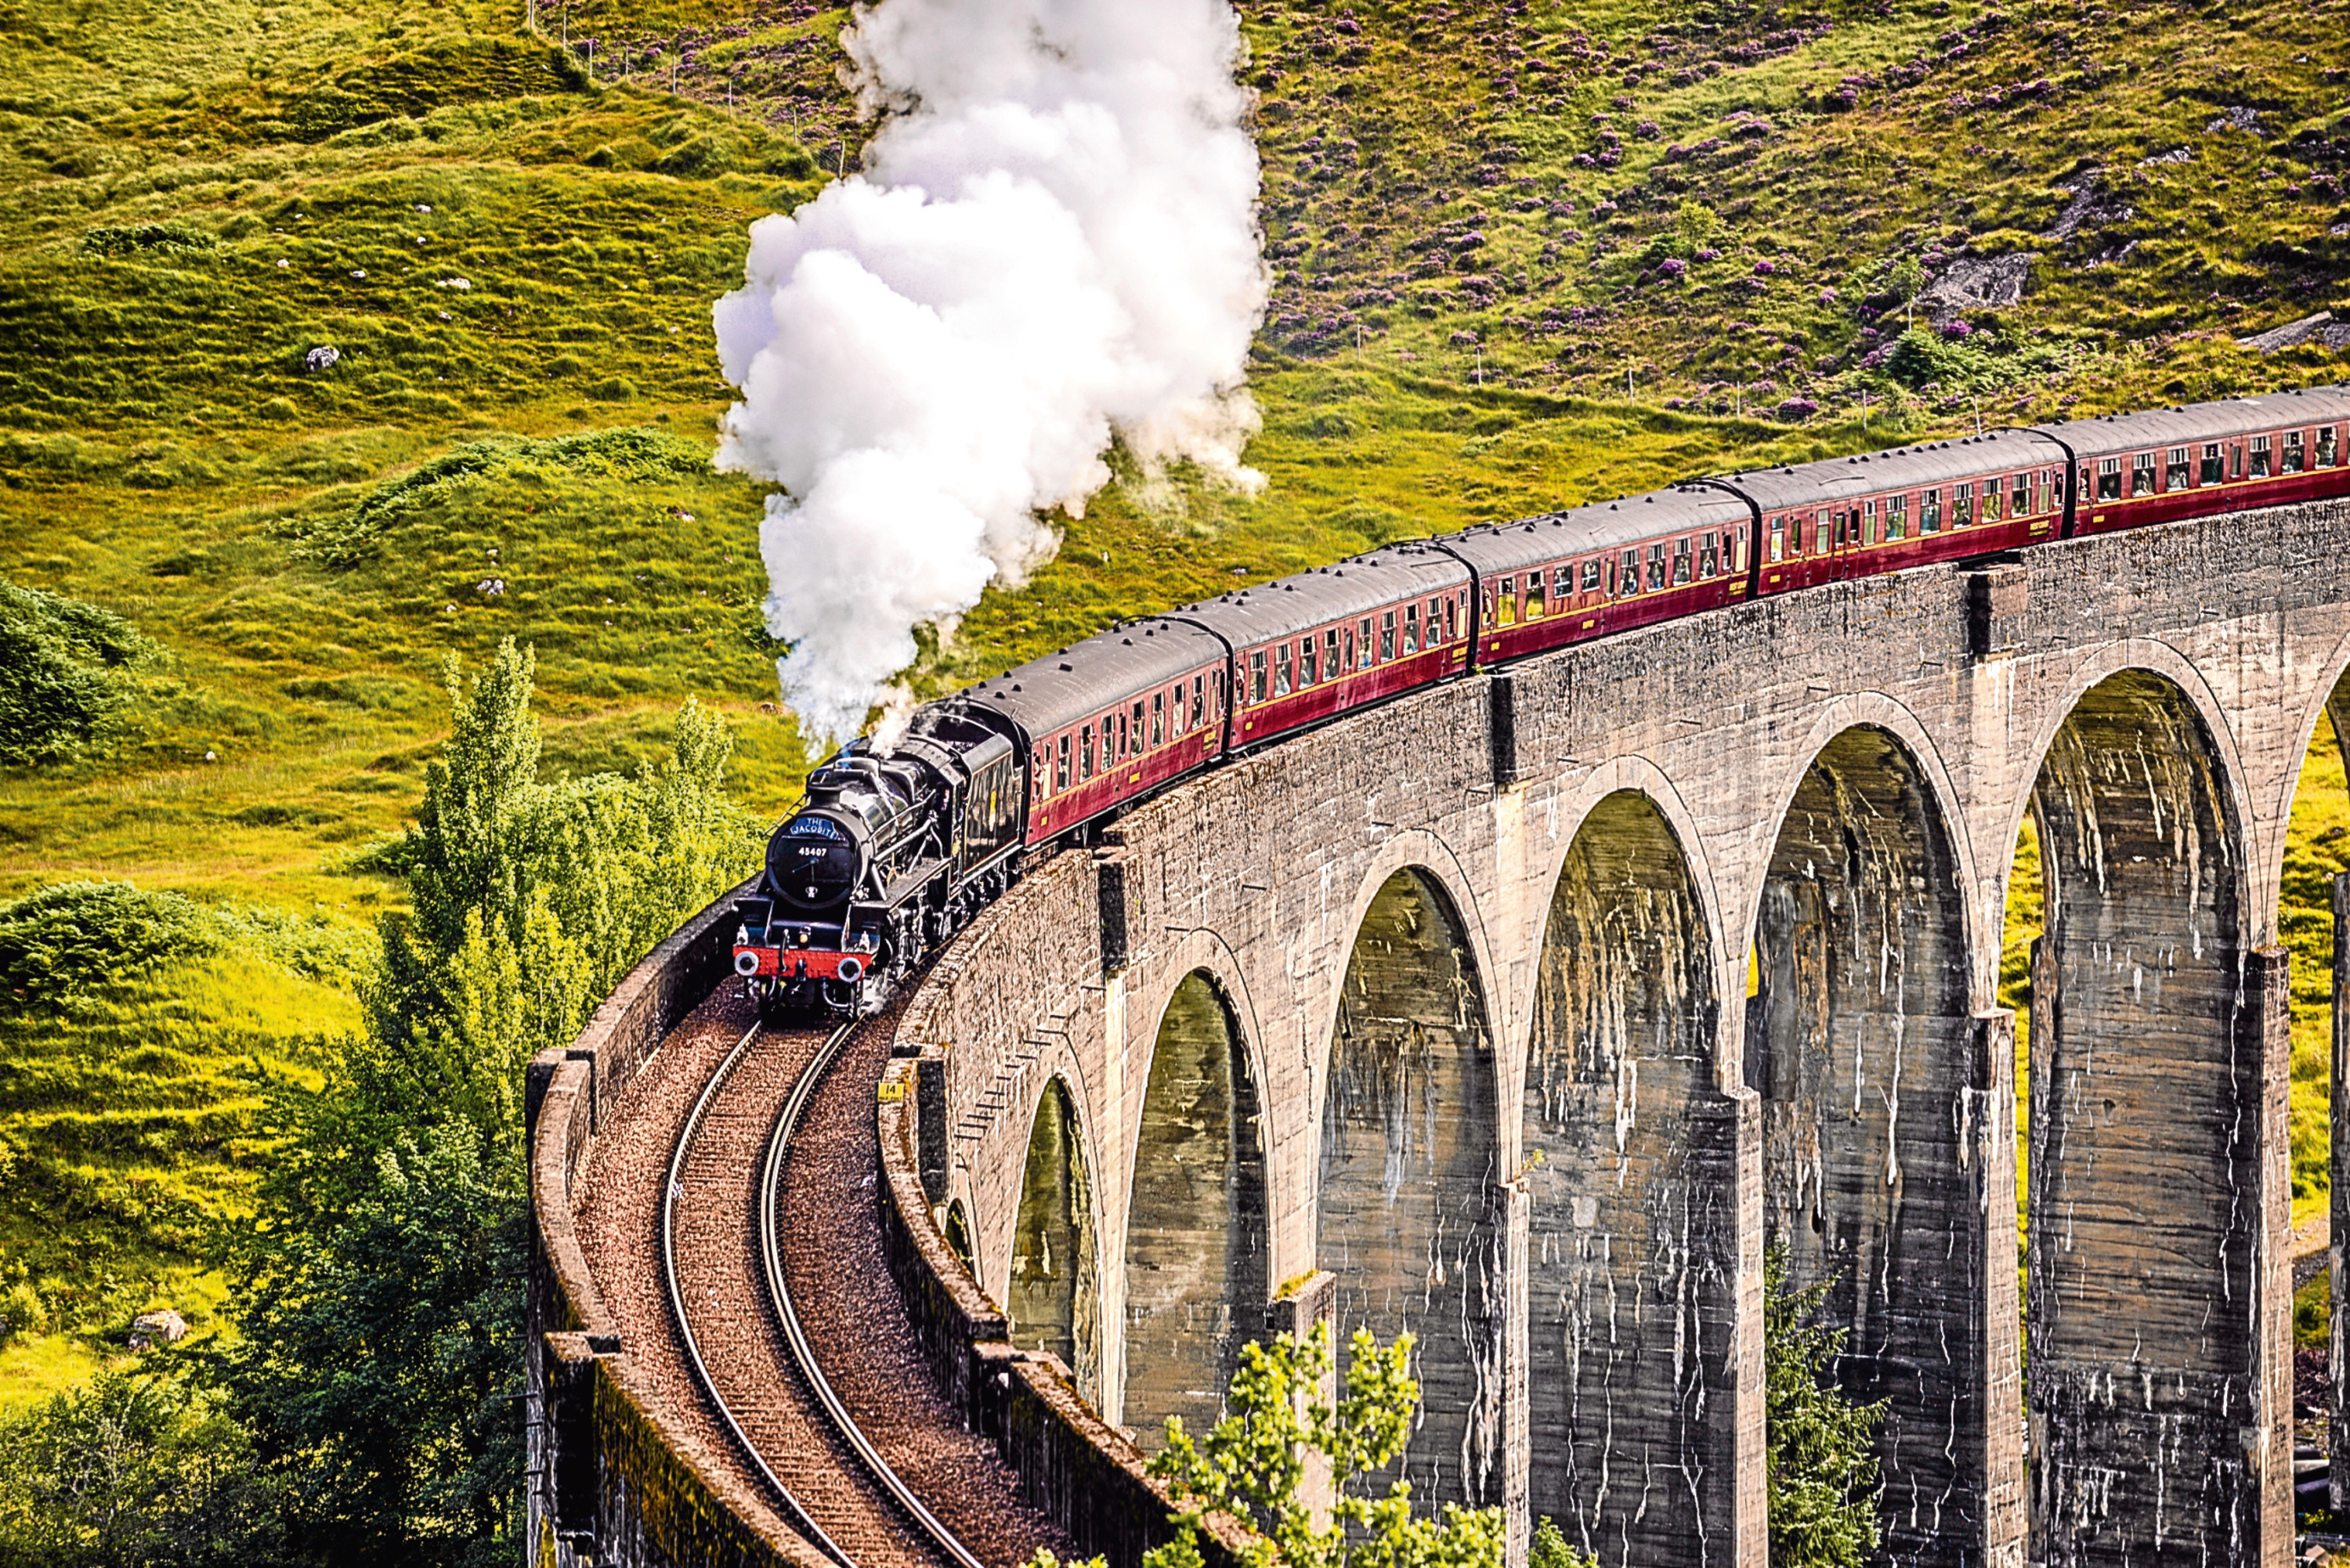 Glenfinnan Railway Viaduct in Scotland with the Jacobite steam train passing over.